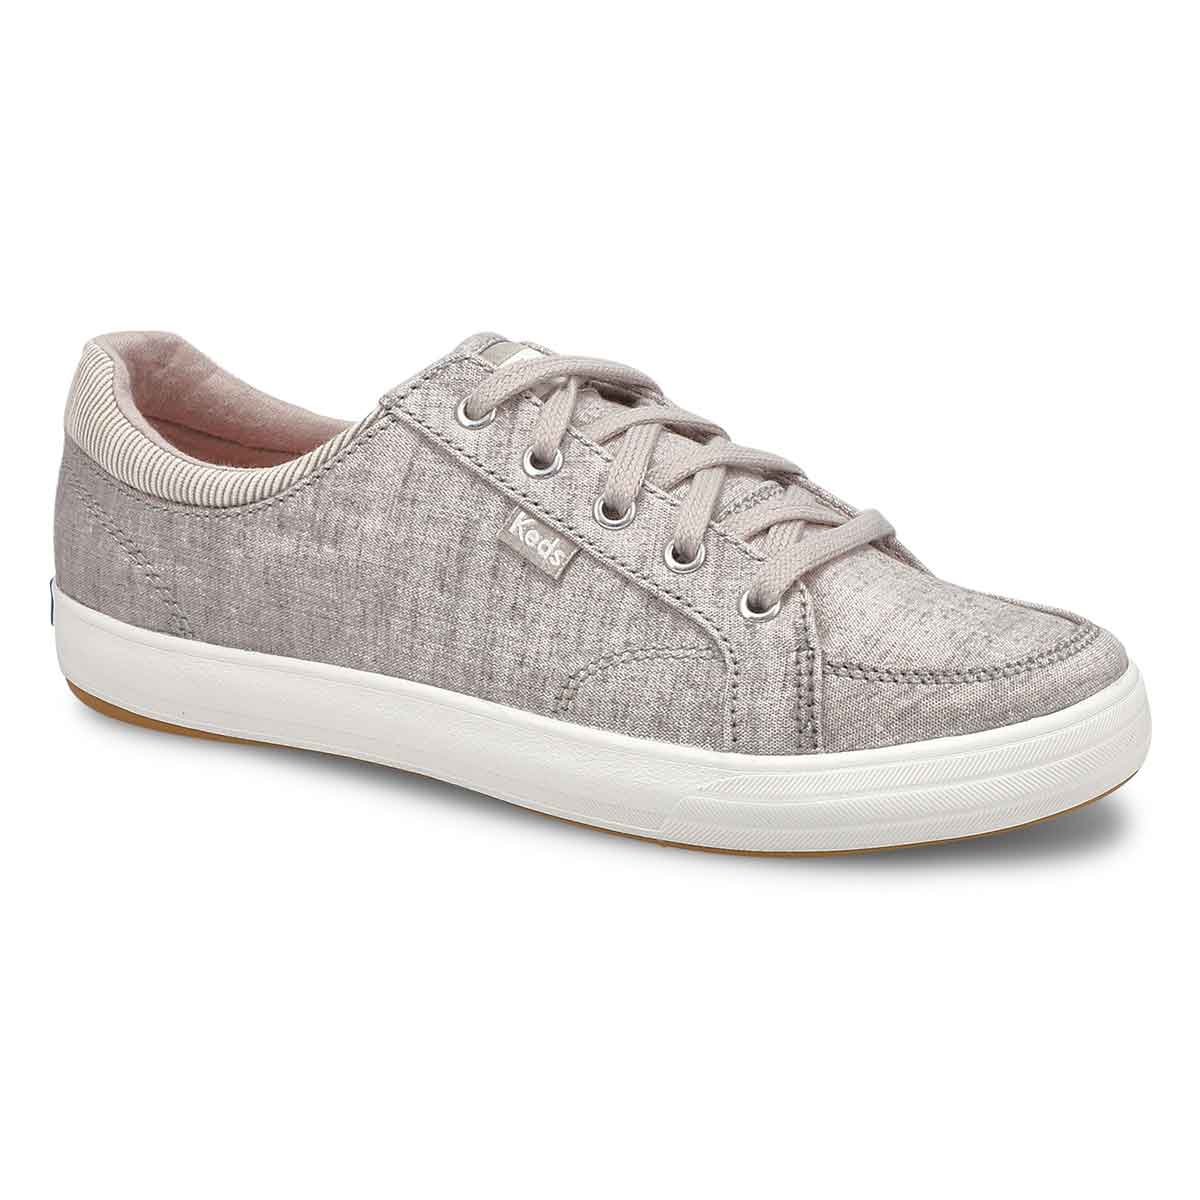 Keds Women's Center II Chambray Laceup Snkr-D | SoftMoc.com